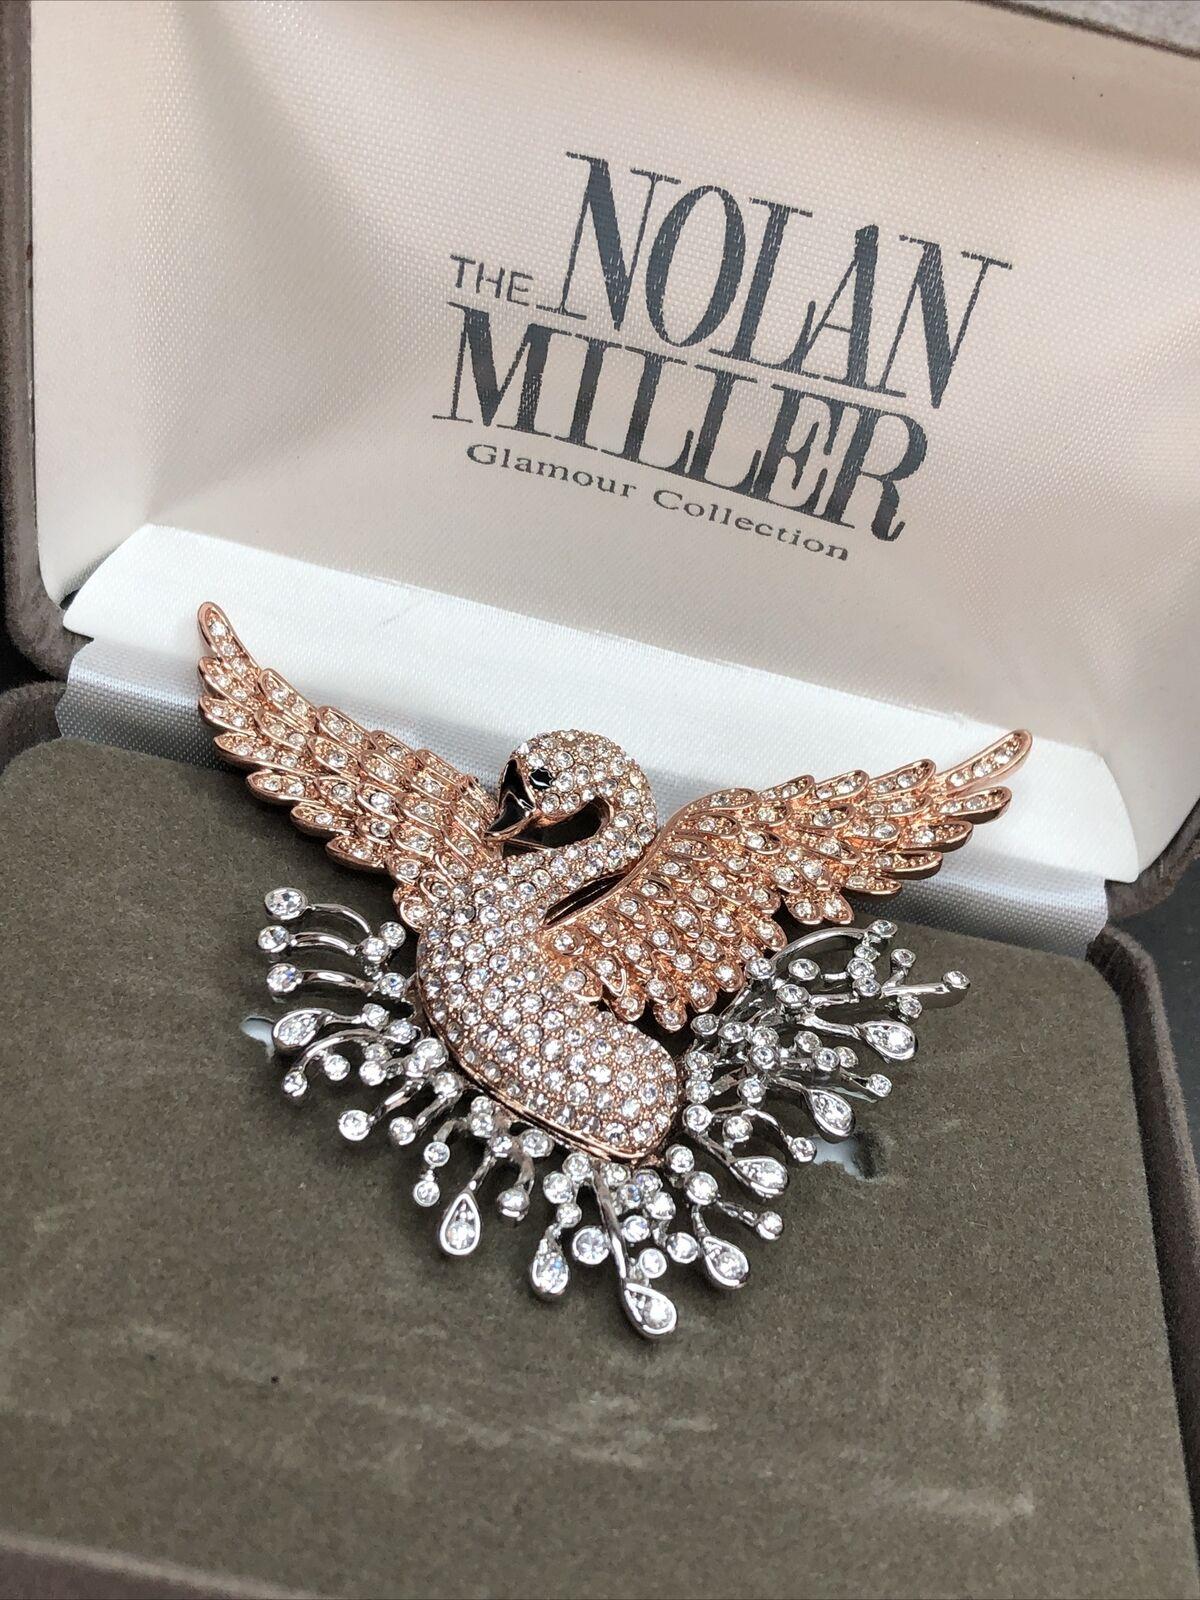 Simply Beautiful! Designer Nolan Miller Signed Brooch featuring a Signature Swan encrusted with Sparkling Crystals. Approx. 2.50” tall x 3.00” w. Original Box. More Beautiful in Real time! A Timeless Treasure you’ll turn to Time and Again! 
